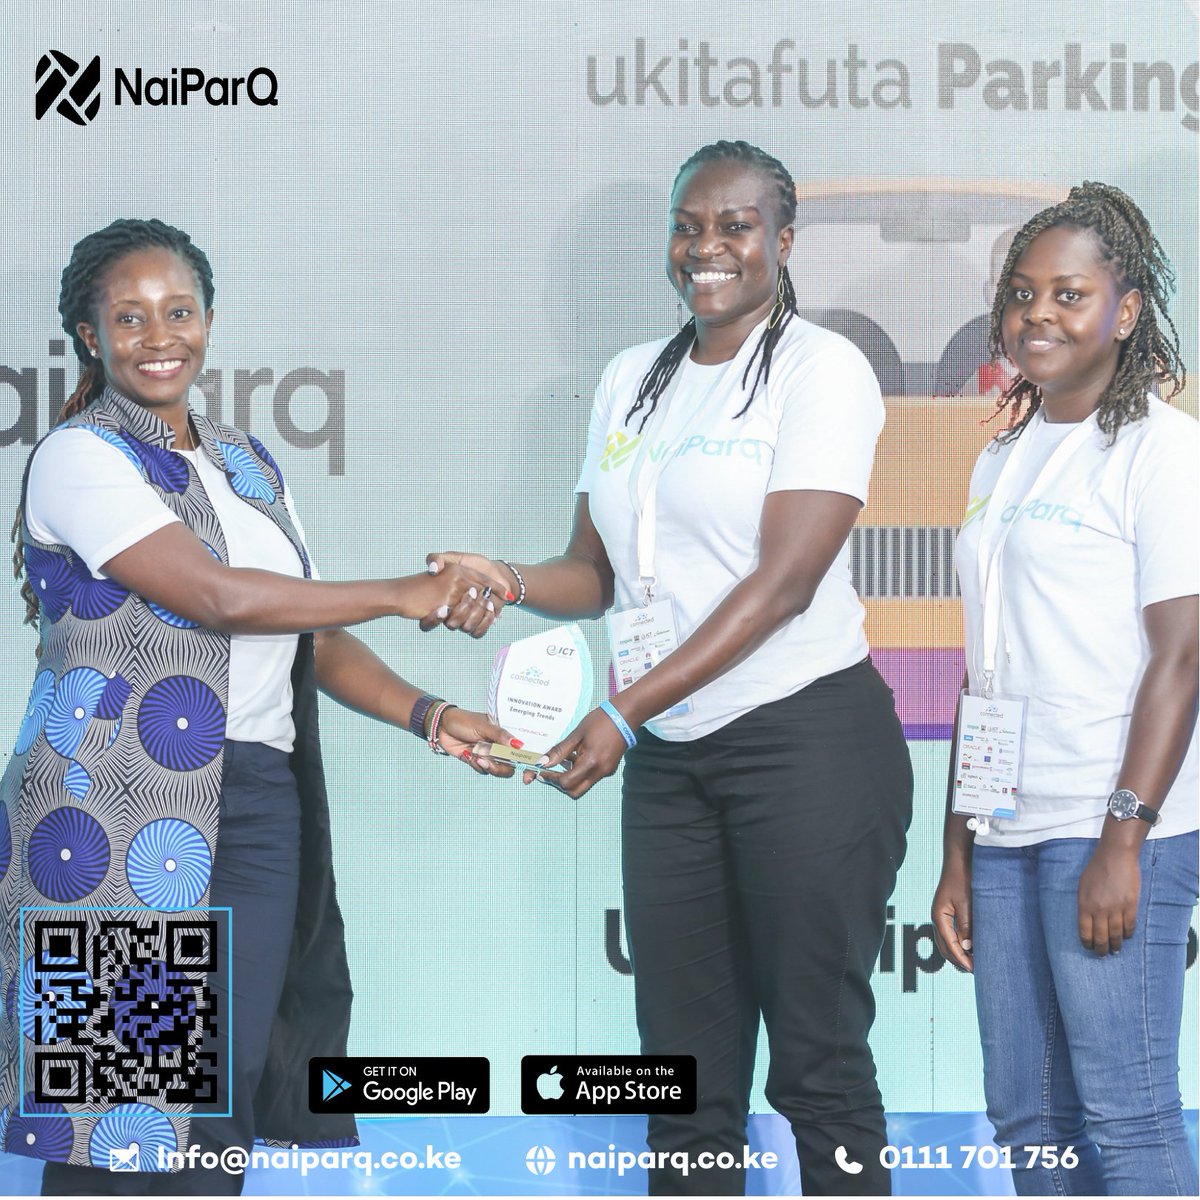 Level up your parking game with #NaiparQ: Join the #WinningTeam today! #SmartParking #ParkingManagement #EfficientParking
naiparq.co.ke